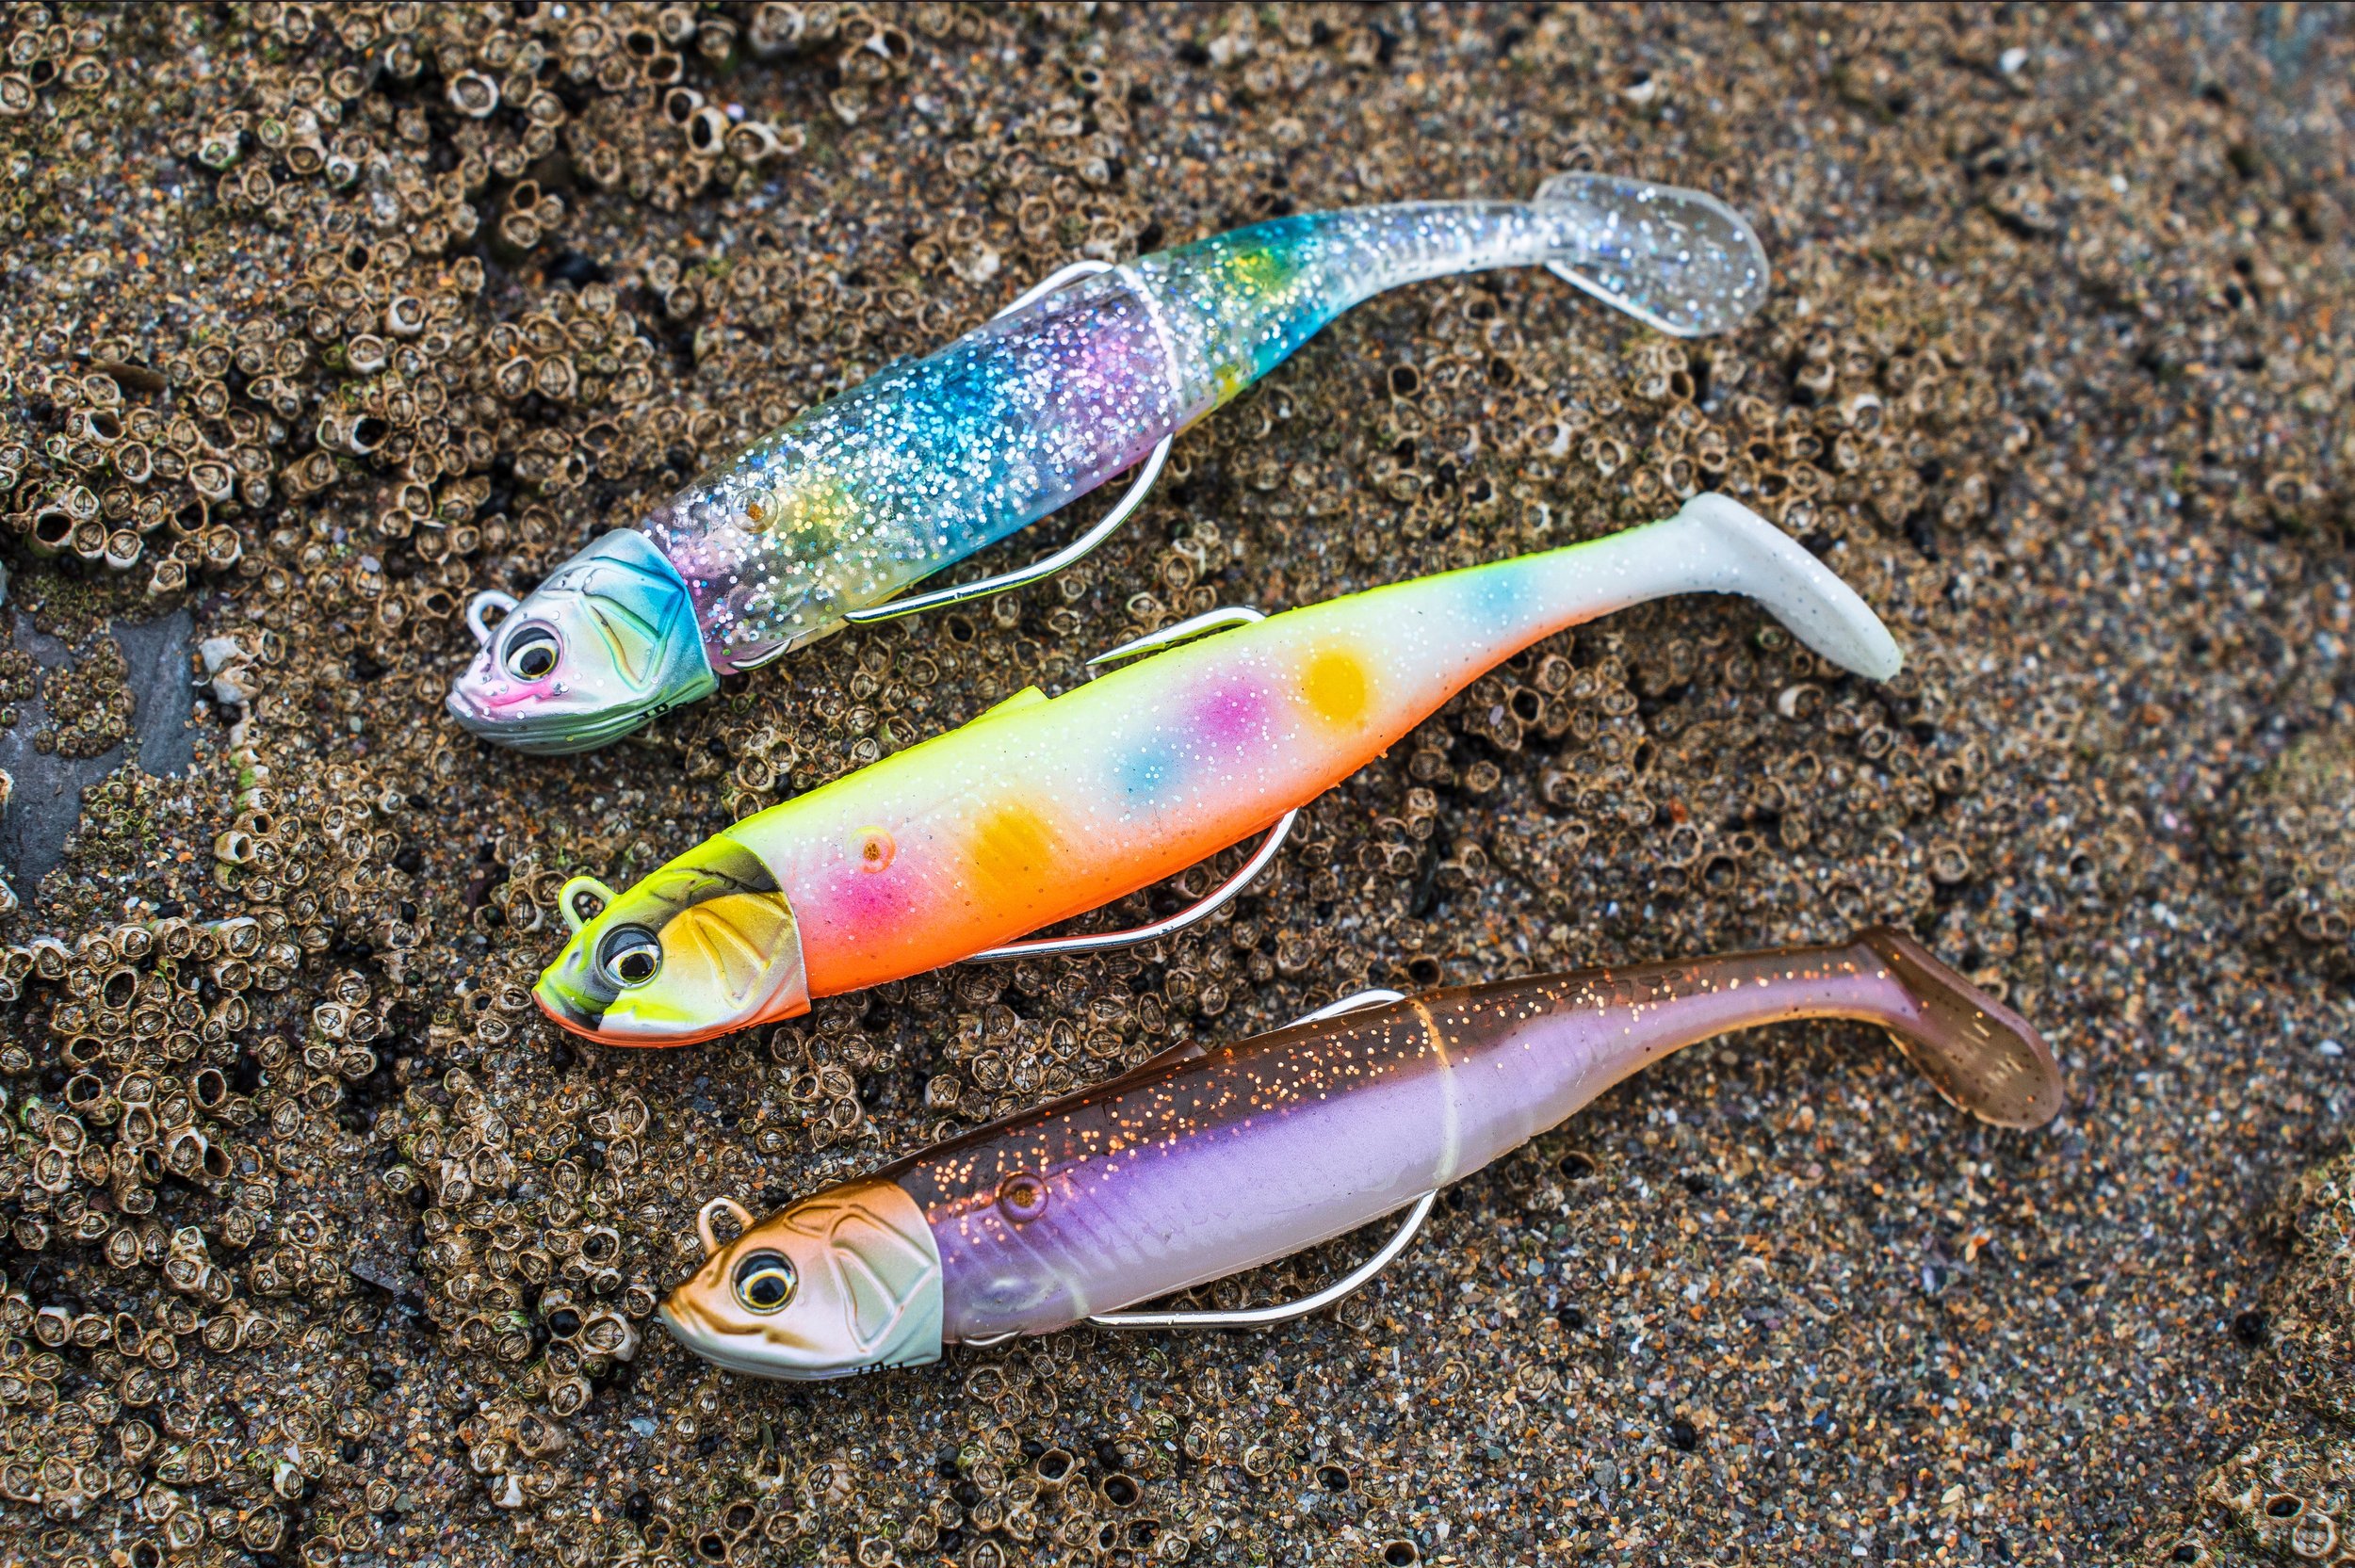 What is the cheapest way to buy these soft plastic “weedless